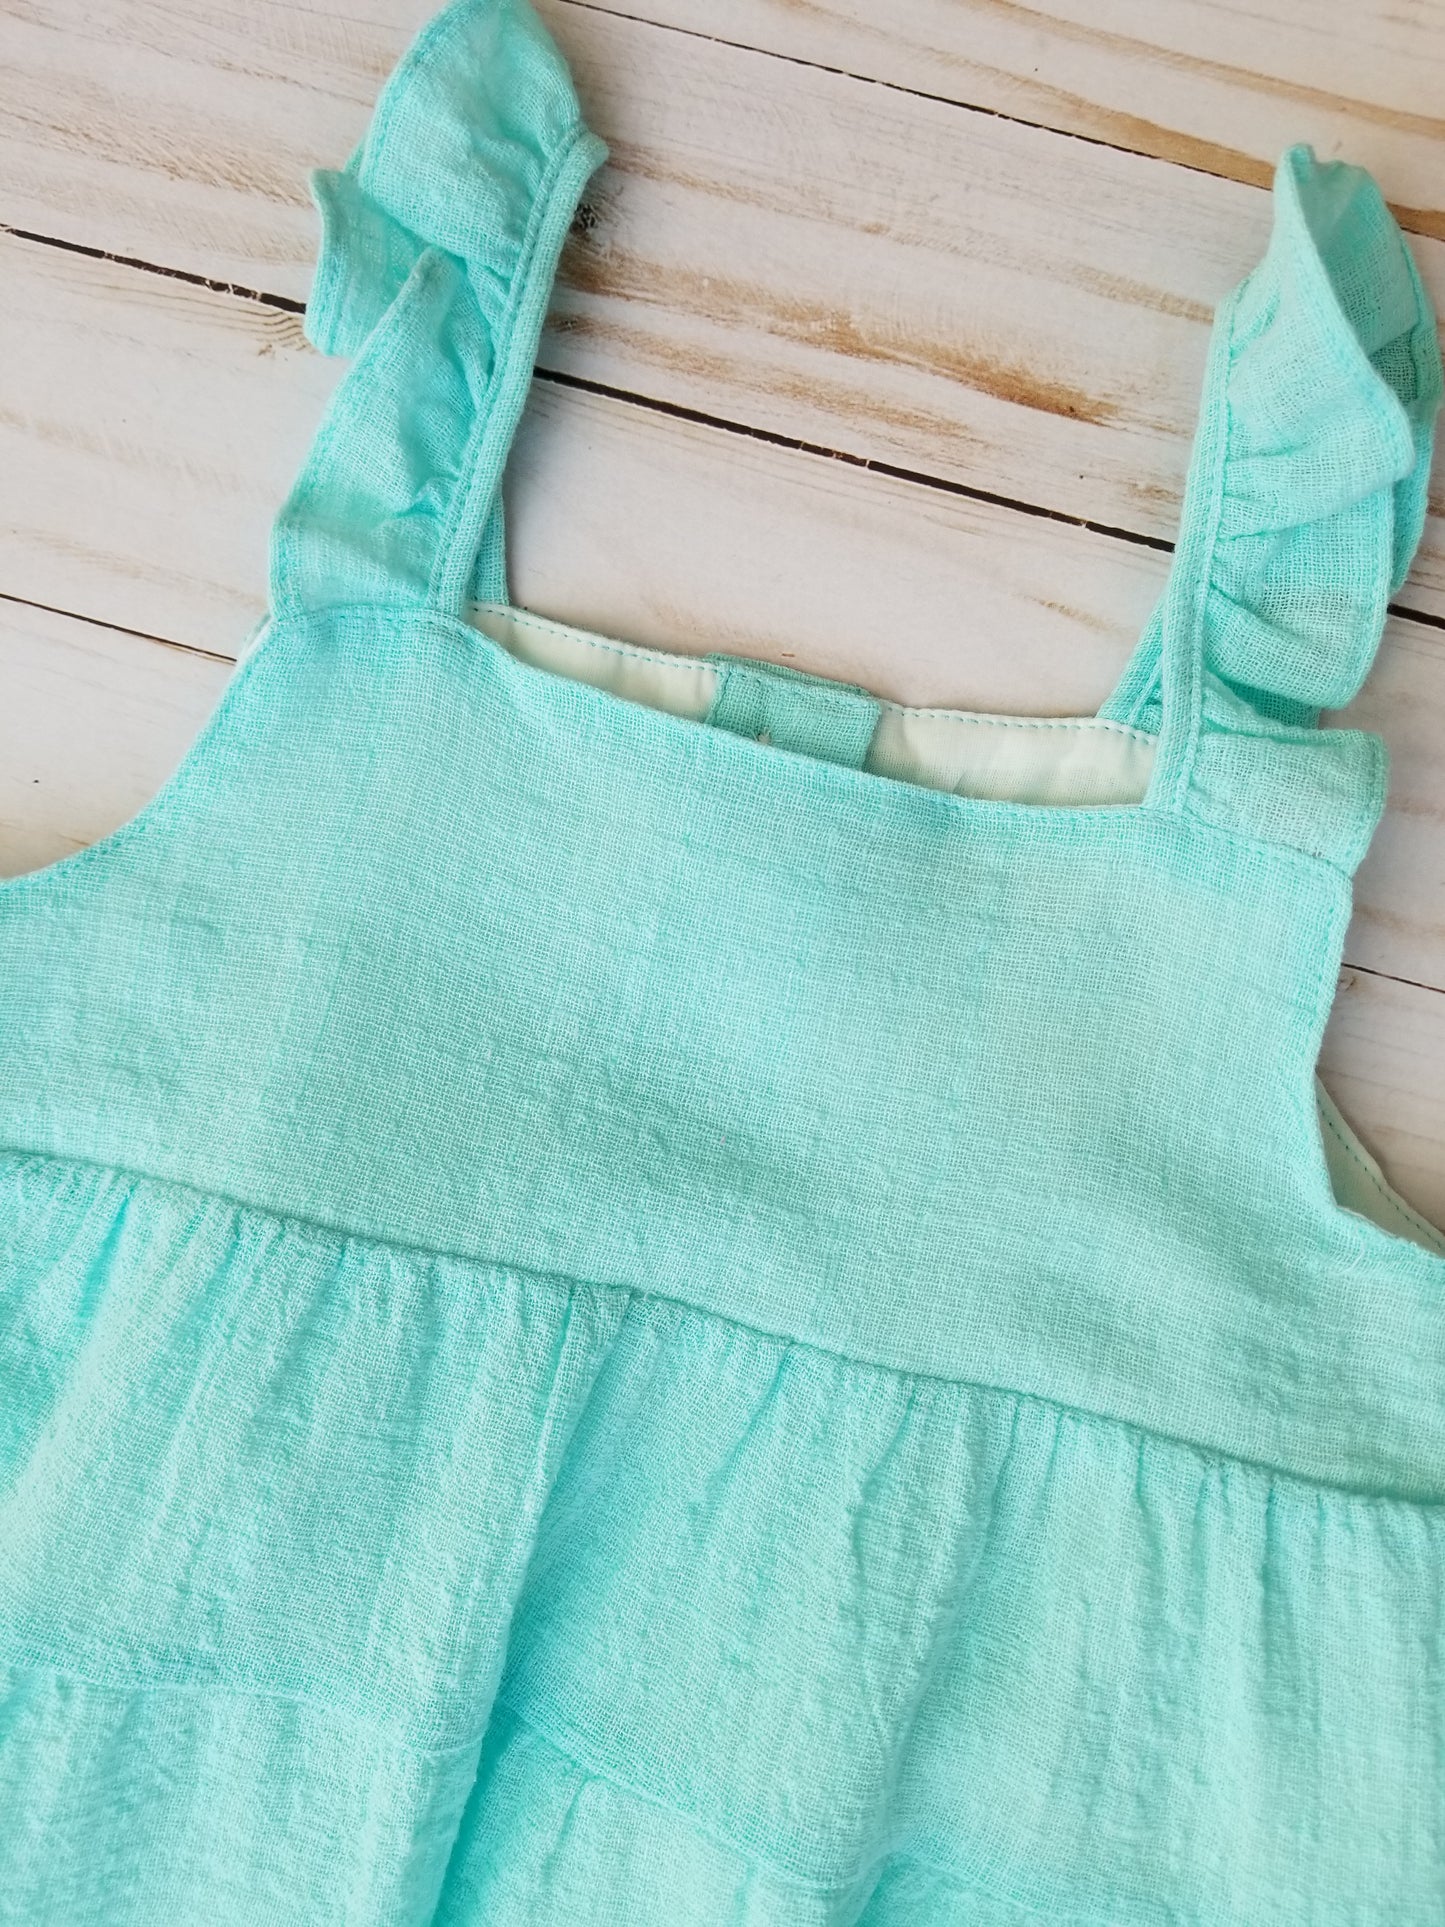 Vignette from Magpie & Mabel Layla Dress - Aqua